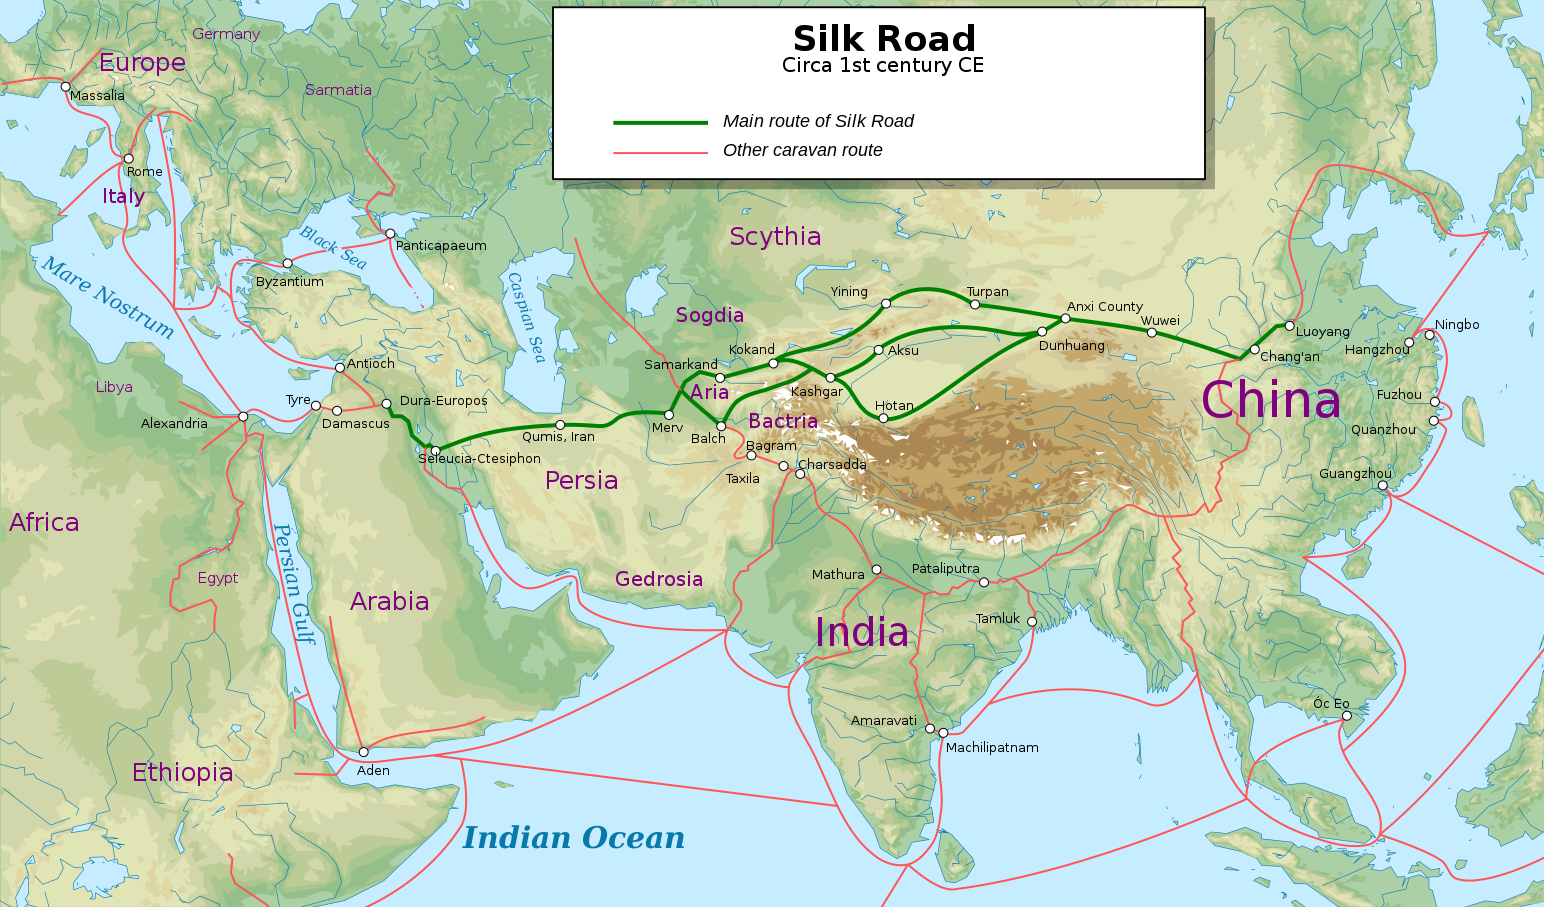 Overland paths and water routes of the Silk Road from China to Europe, 1st century ACE